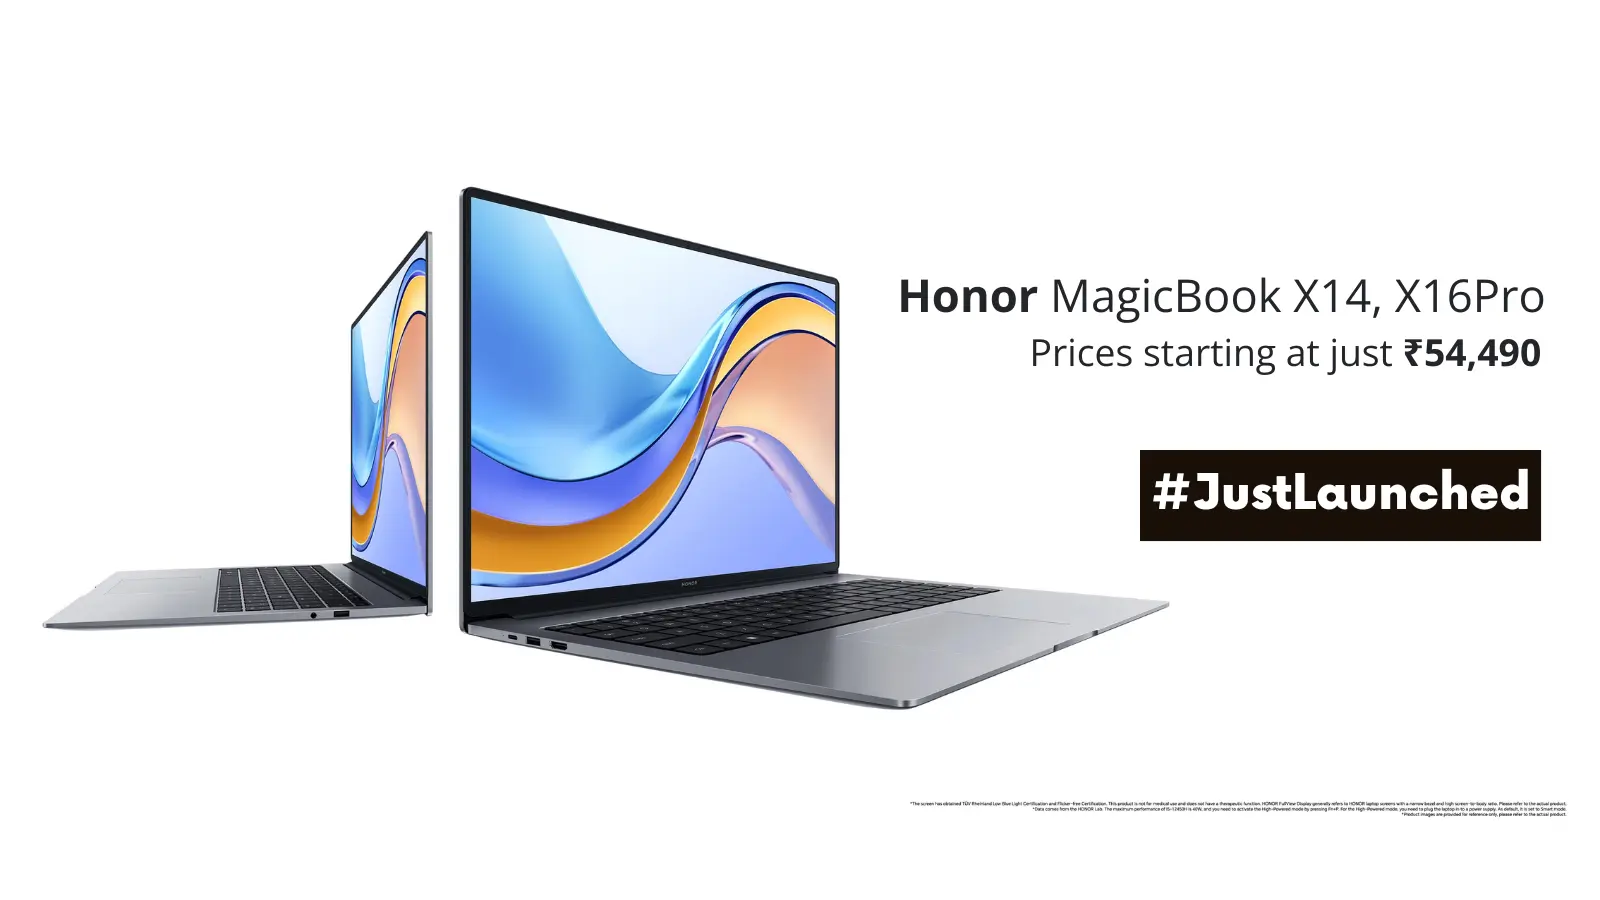 Honor MagicBook X14, X16 Pro Launched